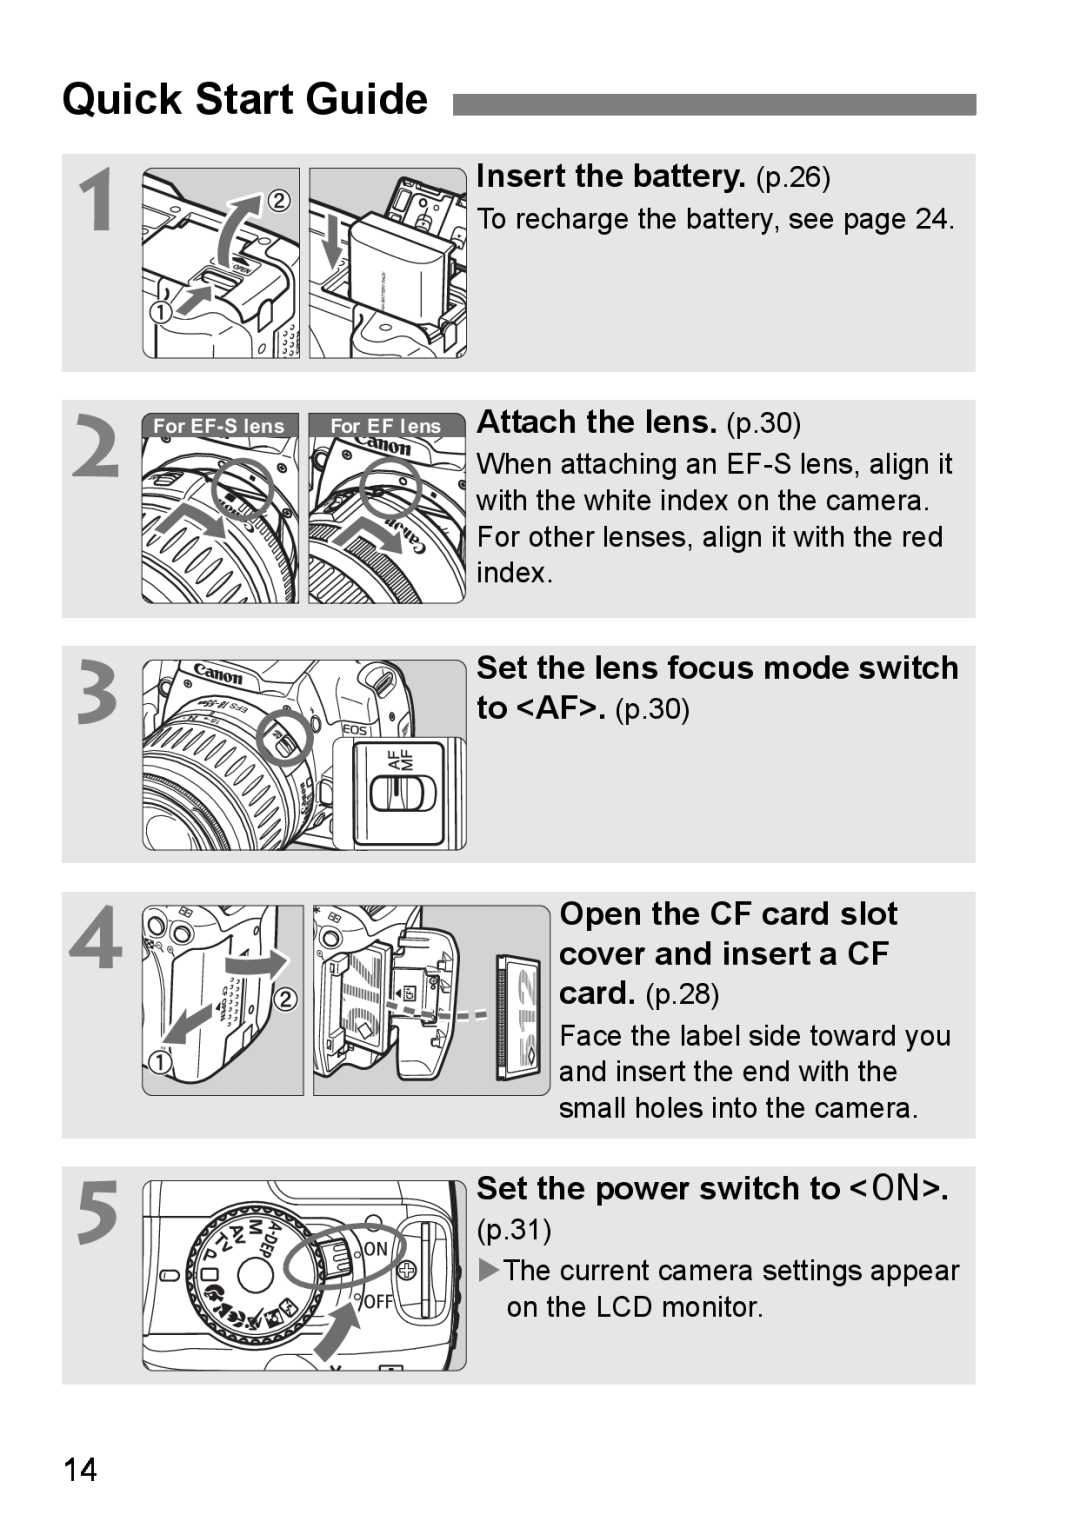 Canon EOS DIGITAL REBEL XTI Quick Start Guide, Insert the battery. p.26, For EF lens Attach the lens. p.30, For EF-S lens 